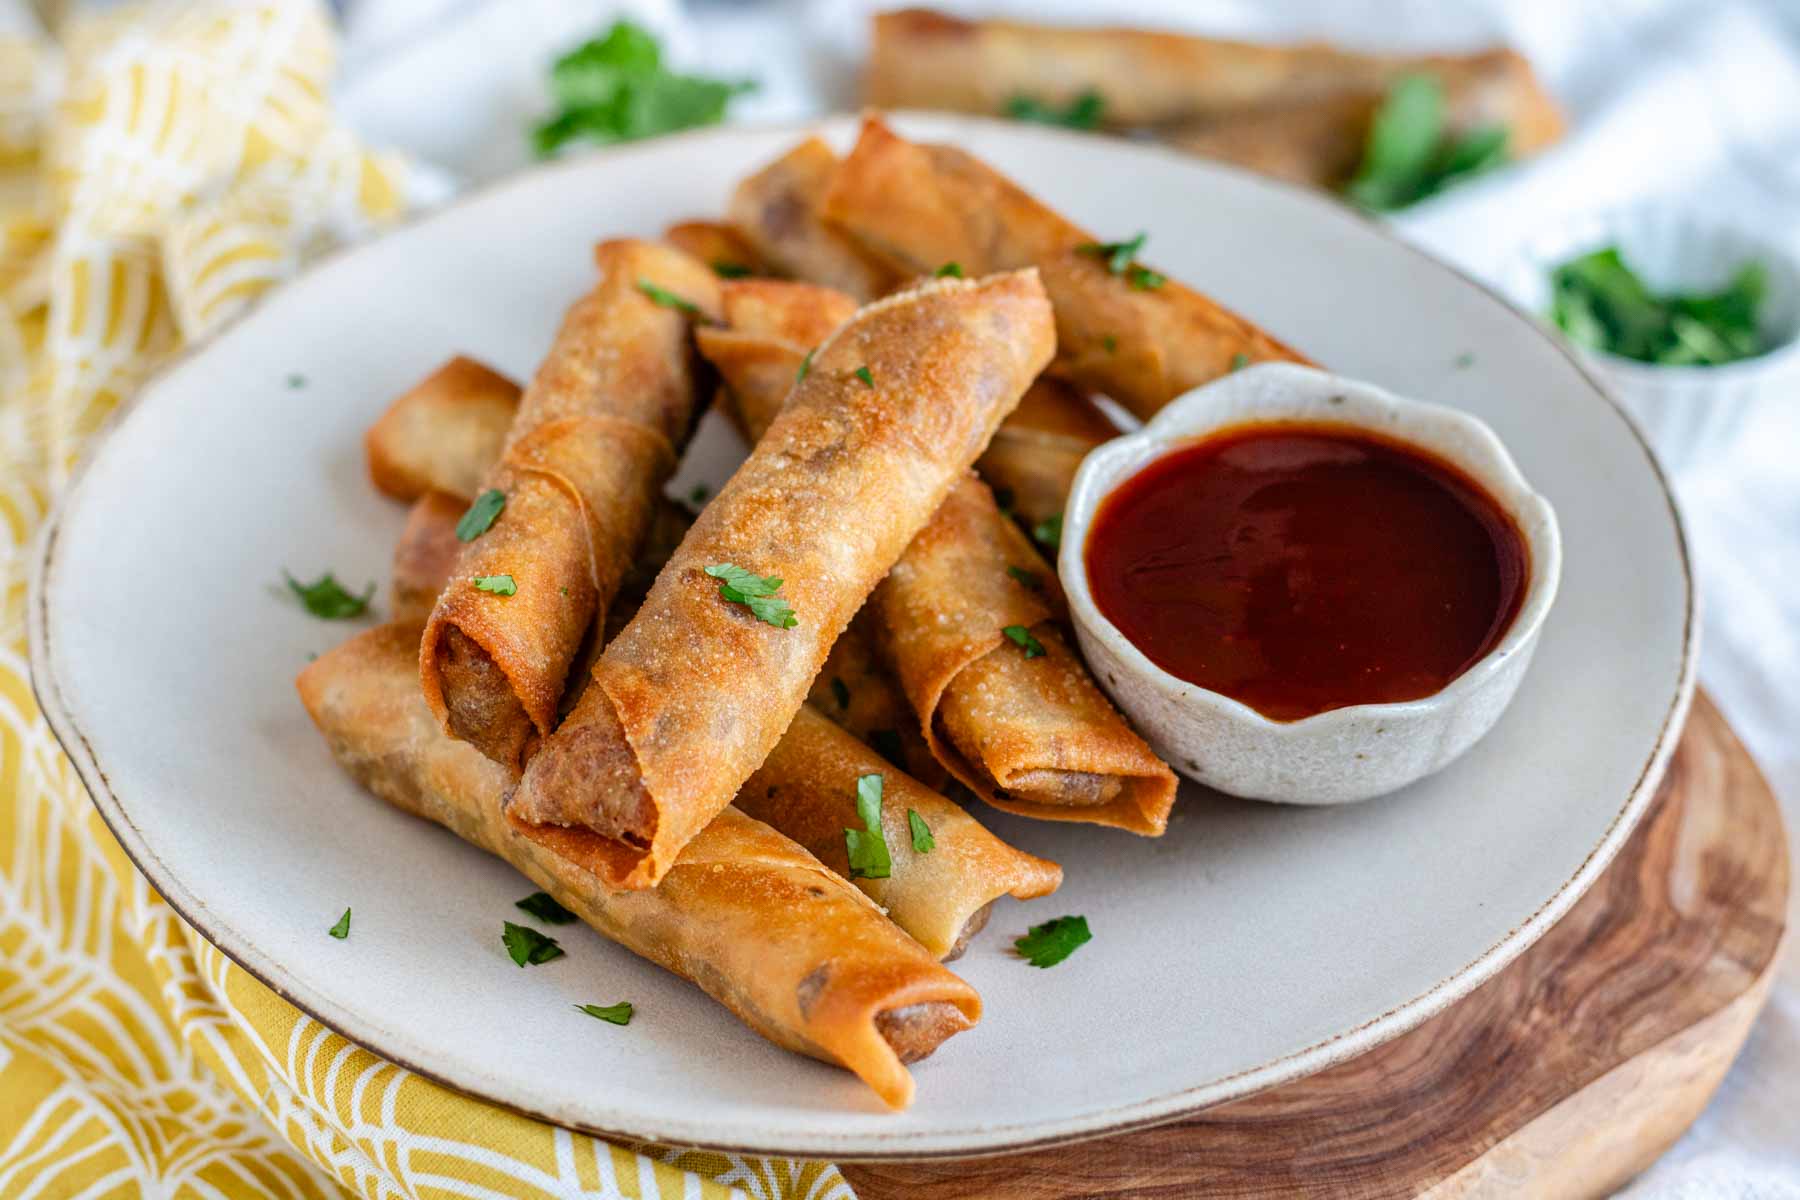 Vegan lumpia on a plate with sauce and cilantro.